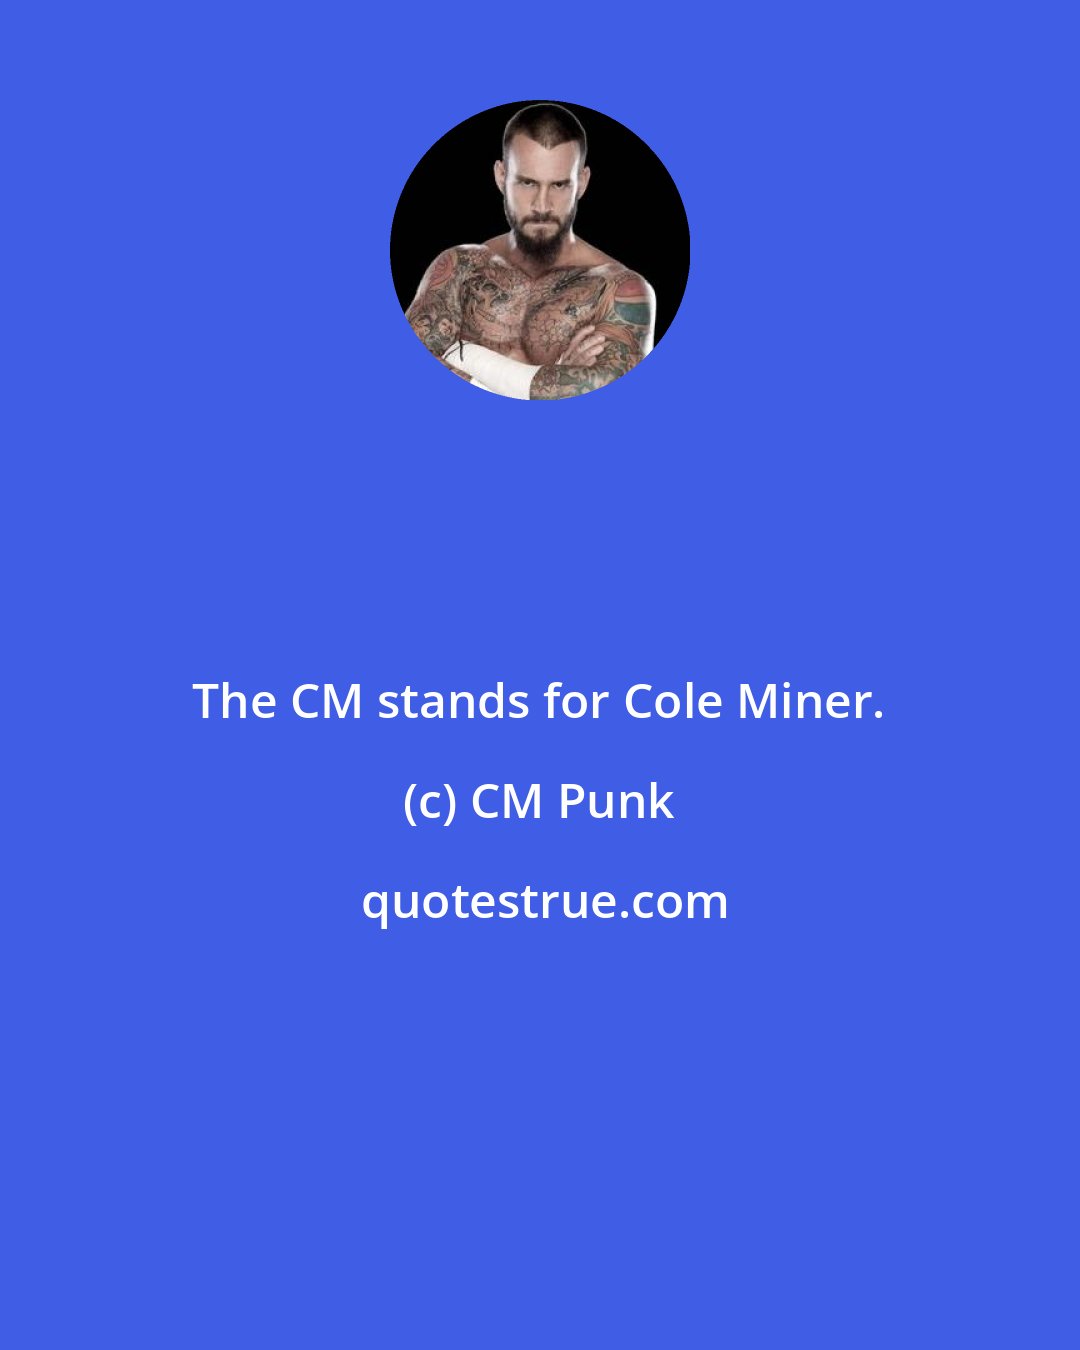 CM Punk: The CM stands for Cole Miner.